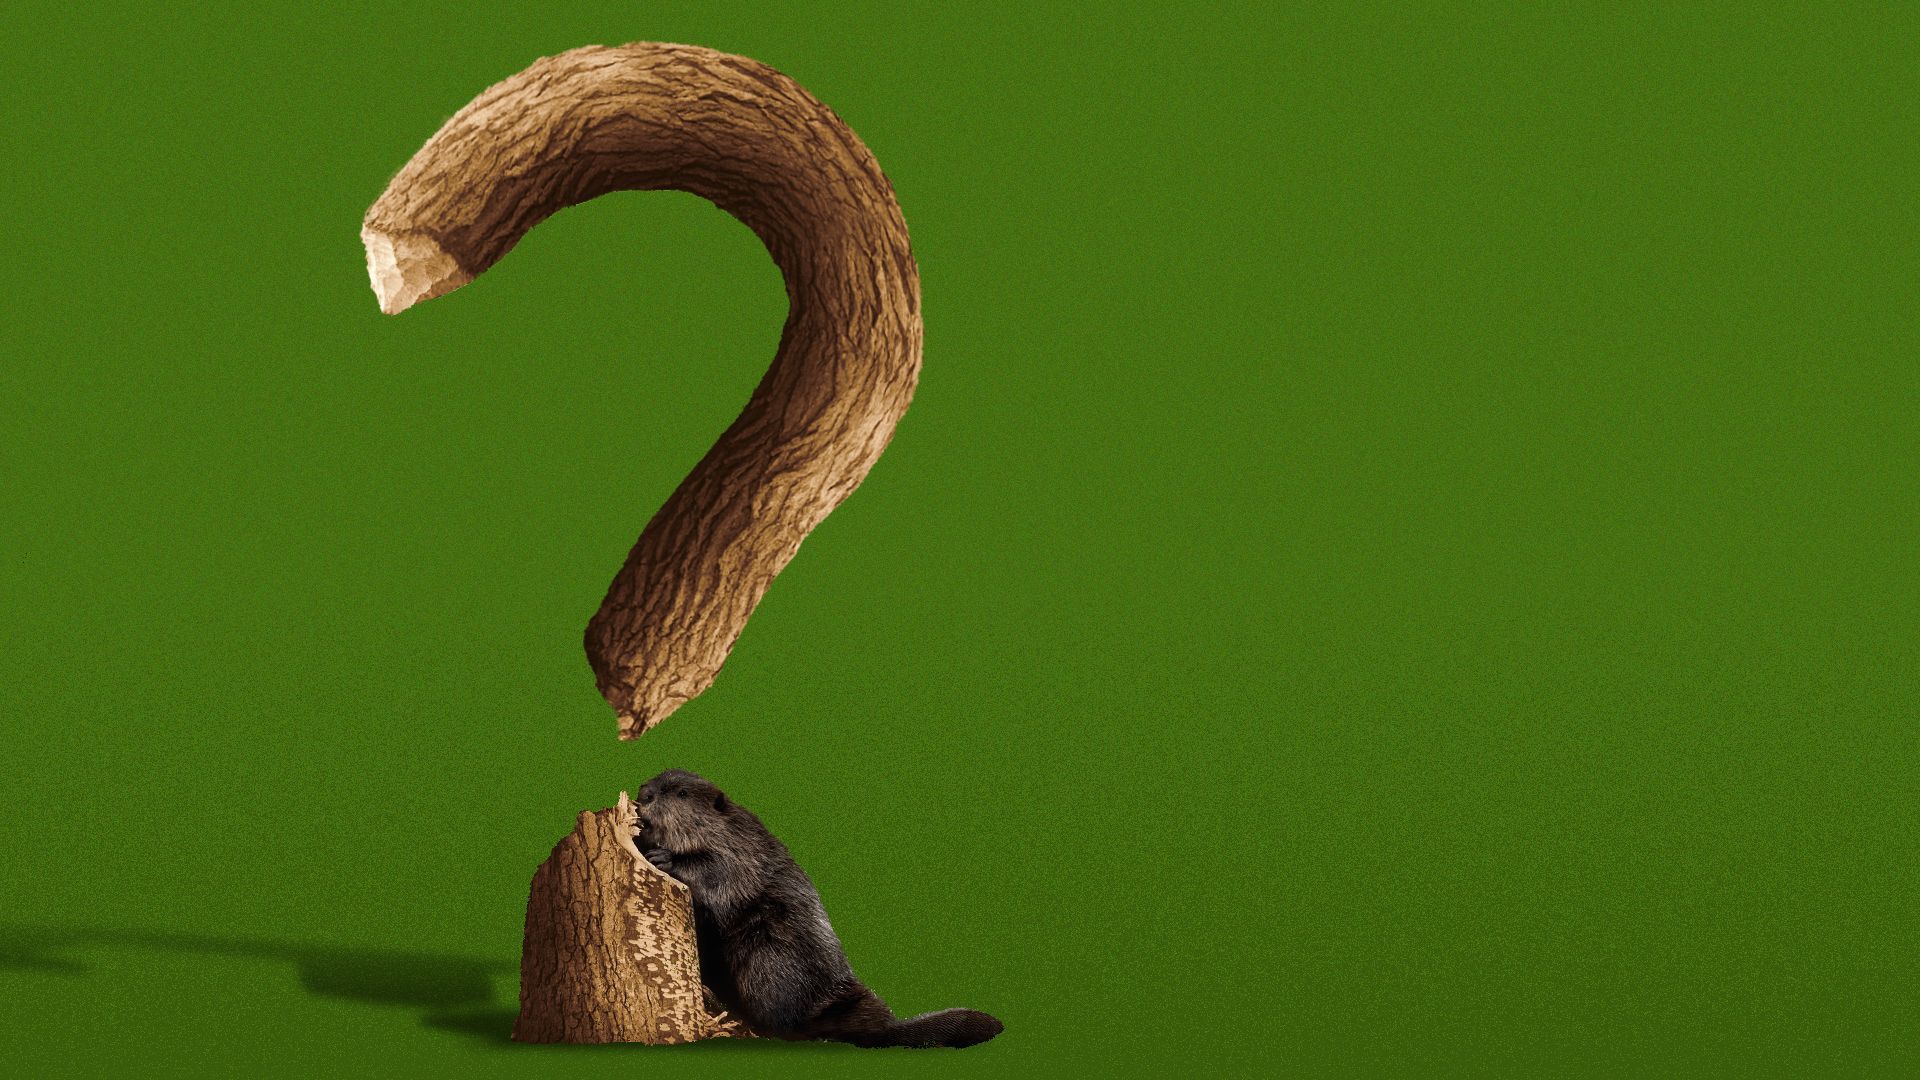 Illustration of a beaver carving a log into a question mark symbol.